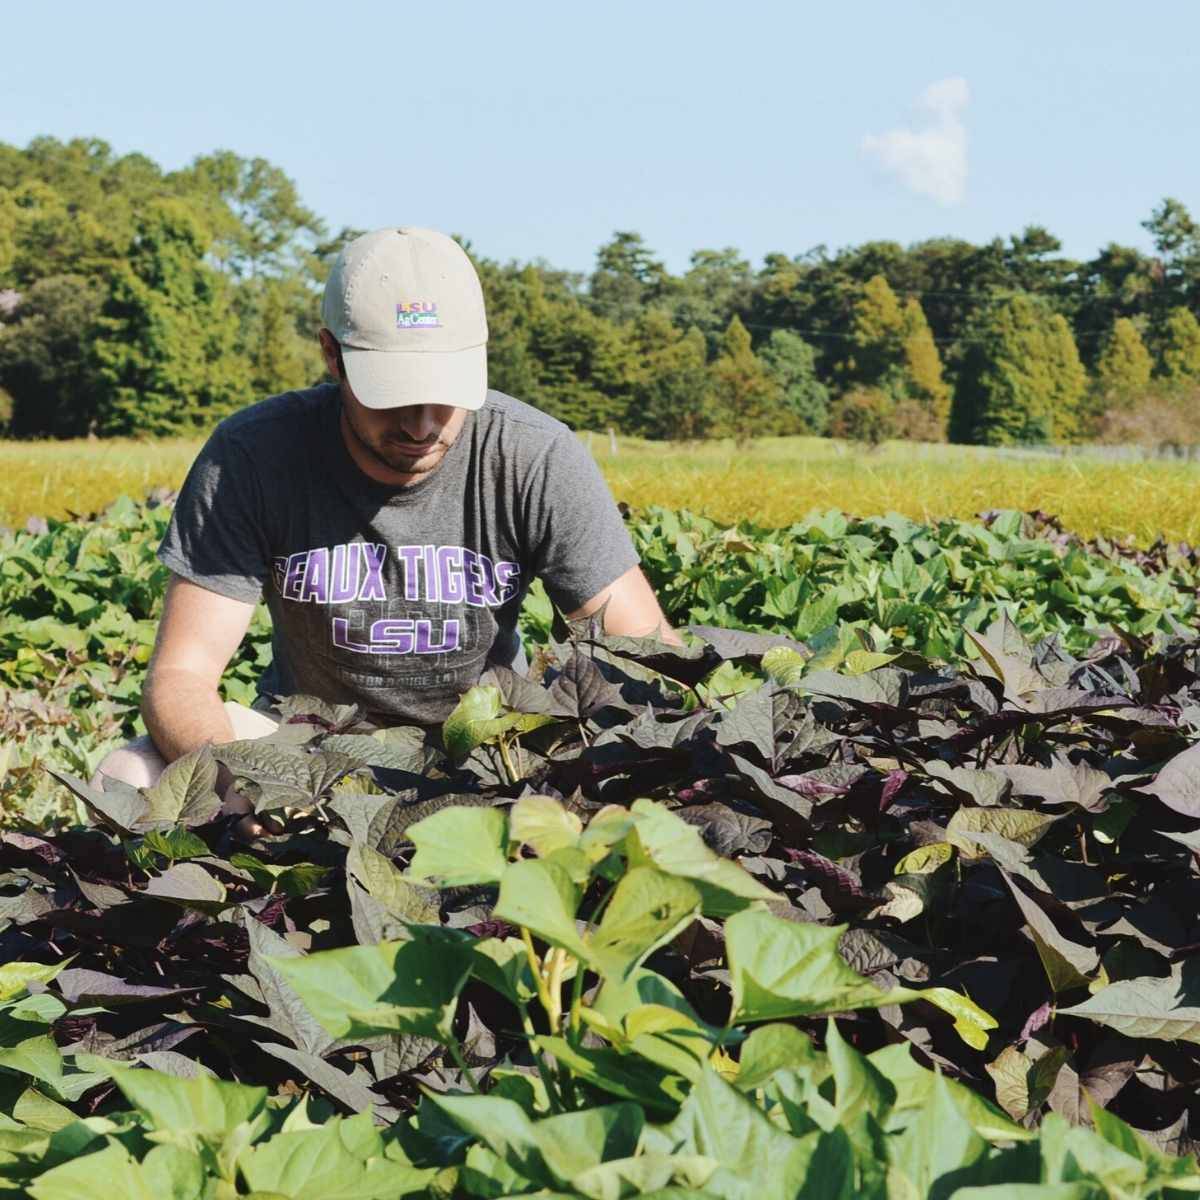 Student scouting for insects in sweet potatoe field